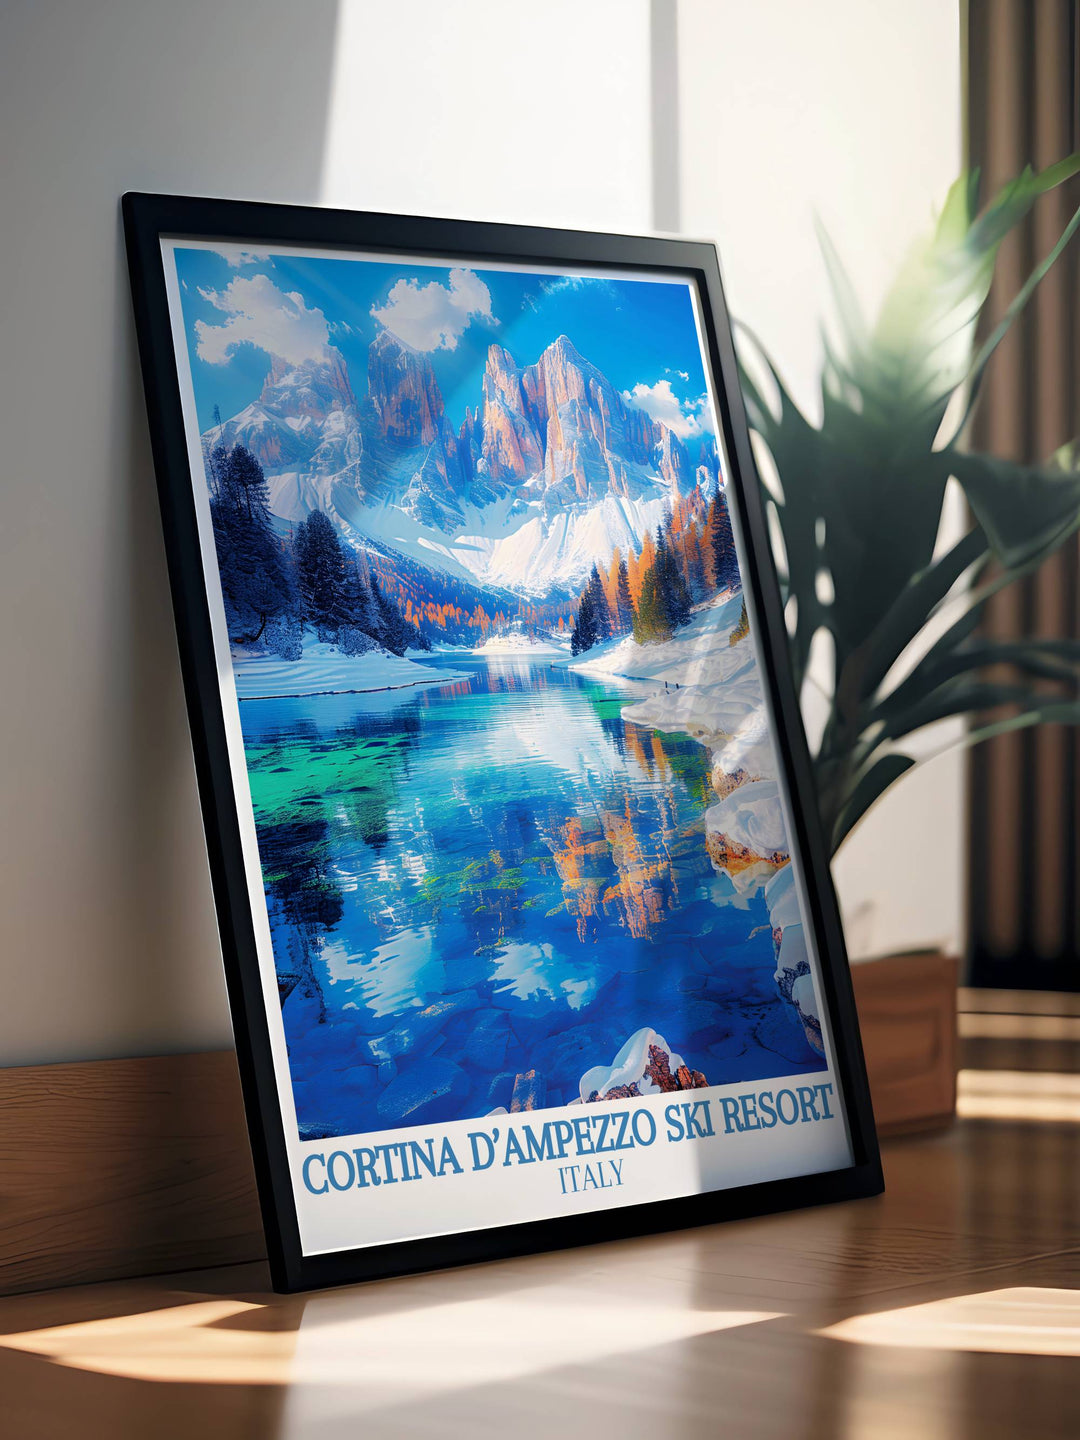 Vintage style ski poster of Cortina d Ampezzo, featuring retro ski attire and historical lifts, ideal for collectors of classic ski art